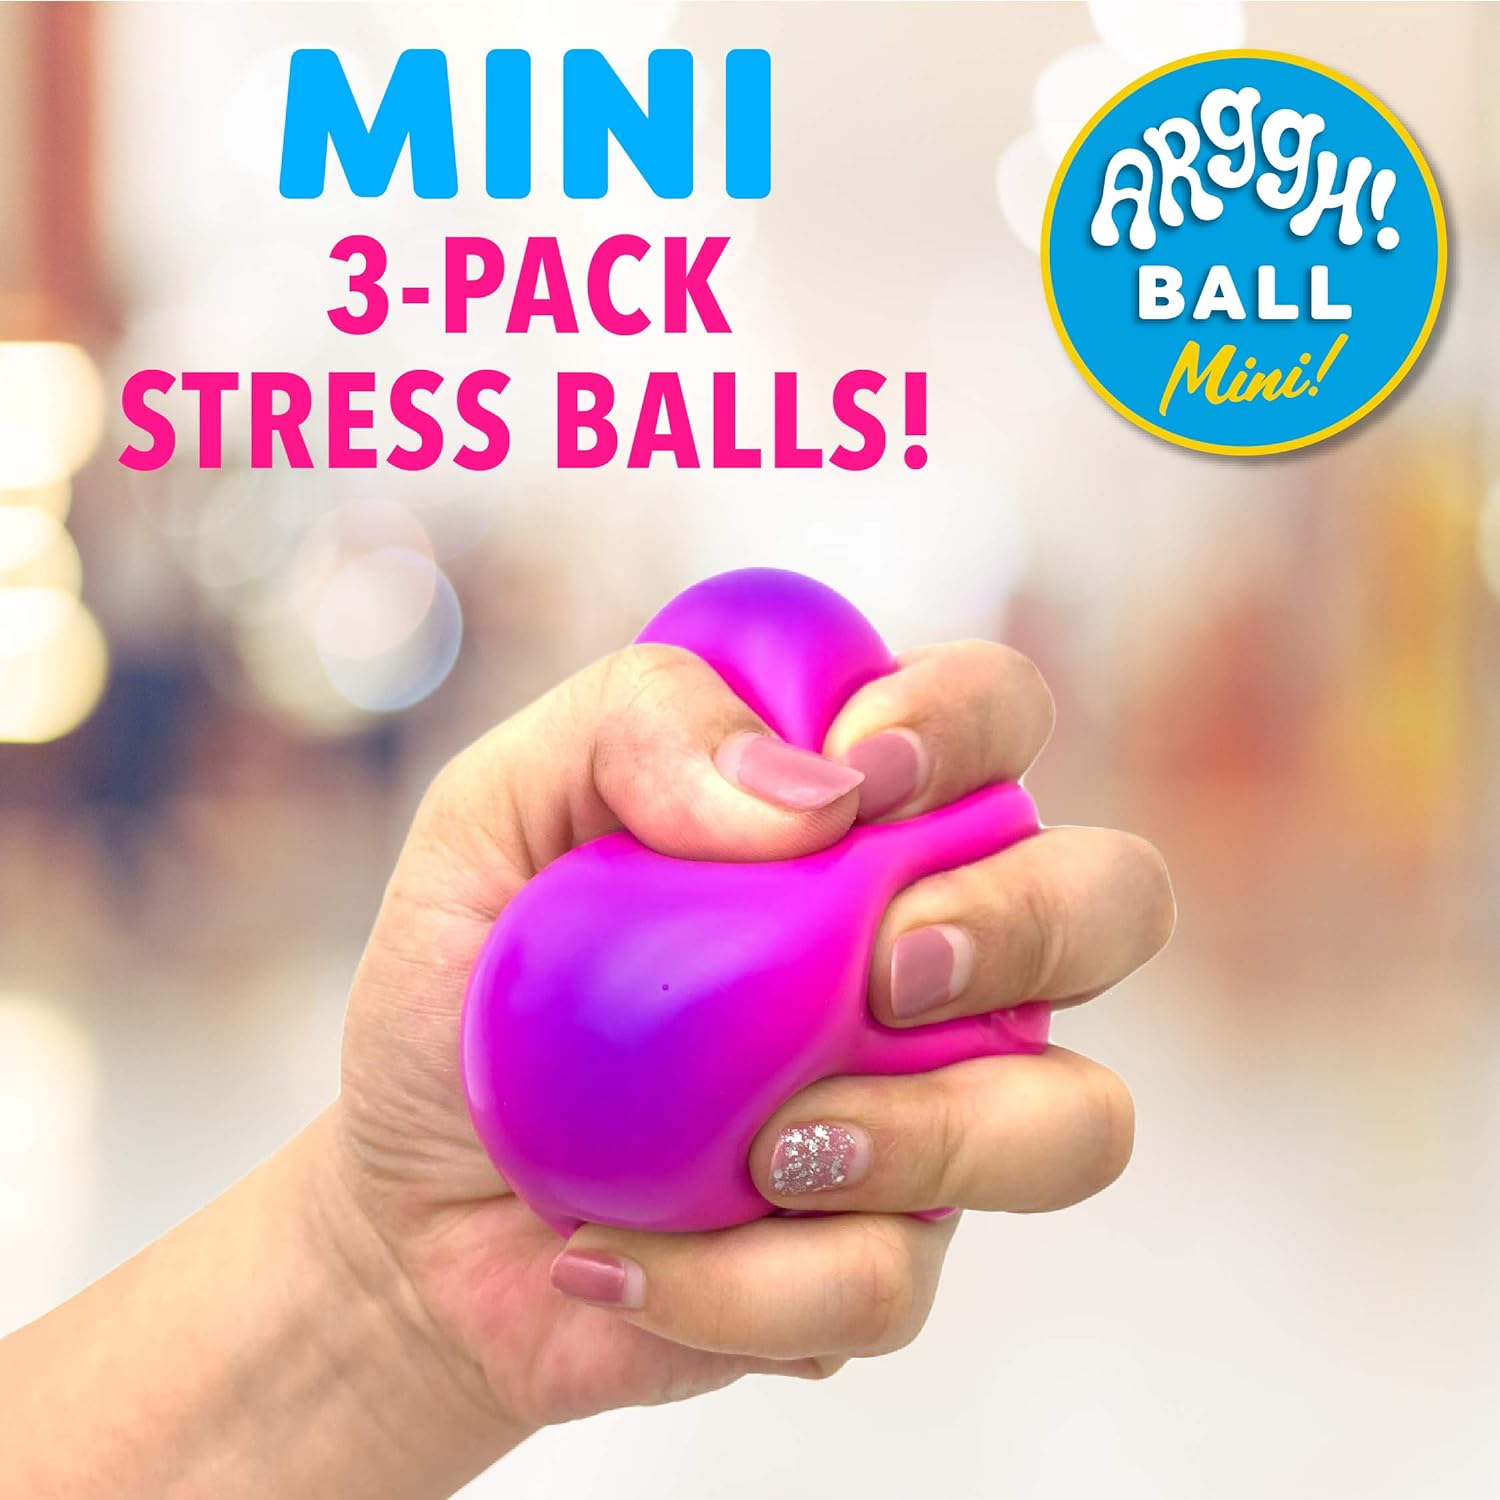 Power Your Fun Arggh Mini Stress Balls for Adults and Kids - 3pk Squishy Stress Balls, Color Changing Resistance Fidget Toys Sensory Stress Anxiety Relief Squeeze Toys Squishy Toy (Yellow, Pink, Blue)